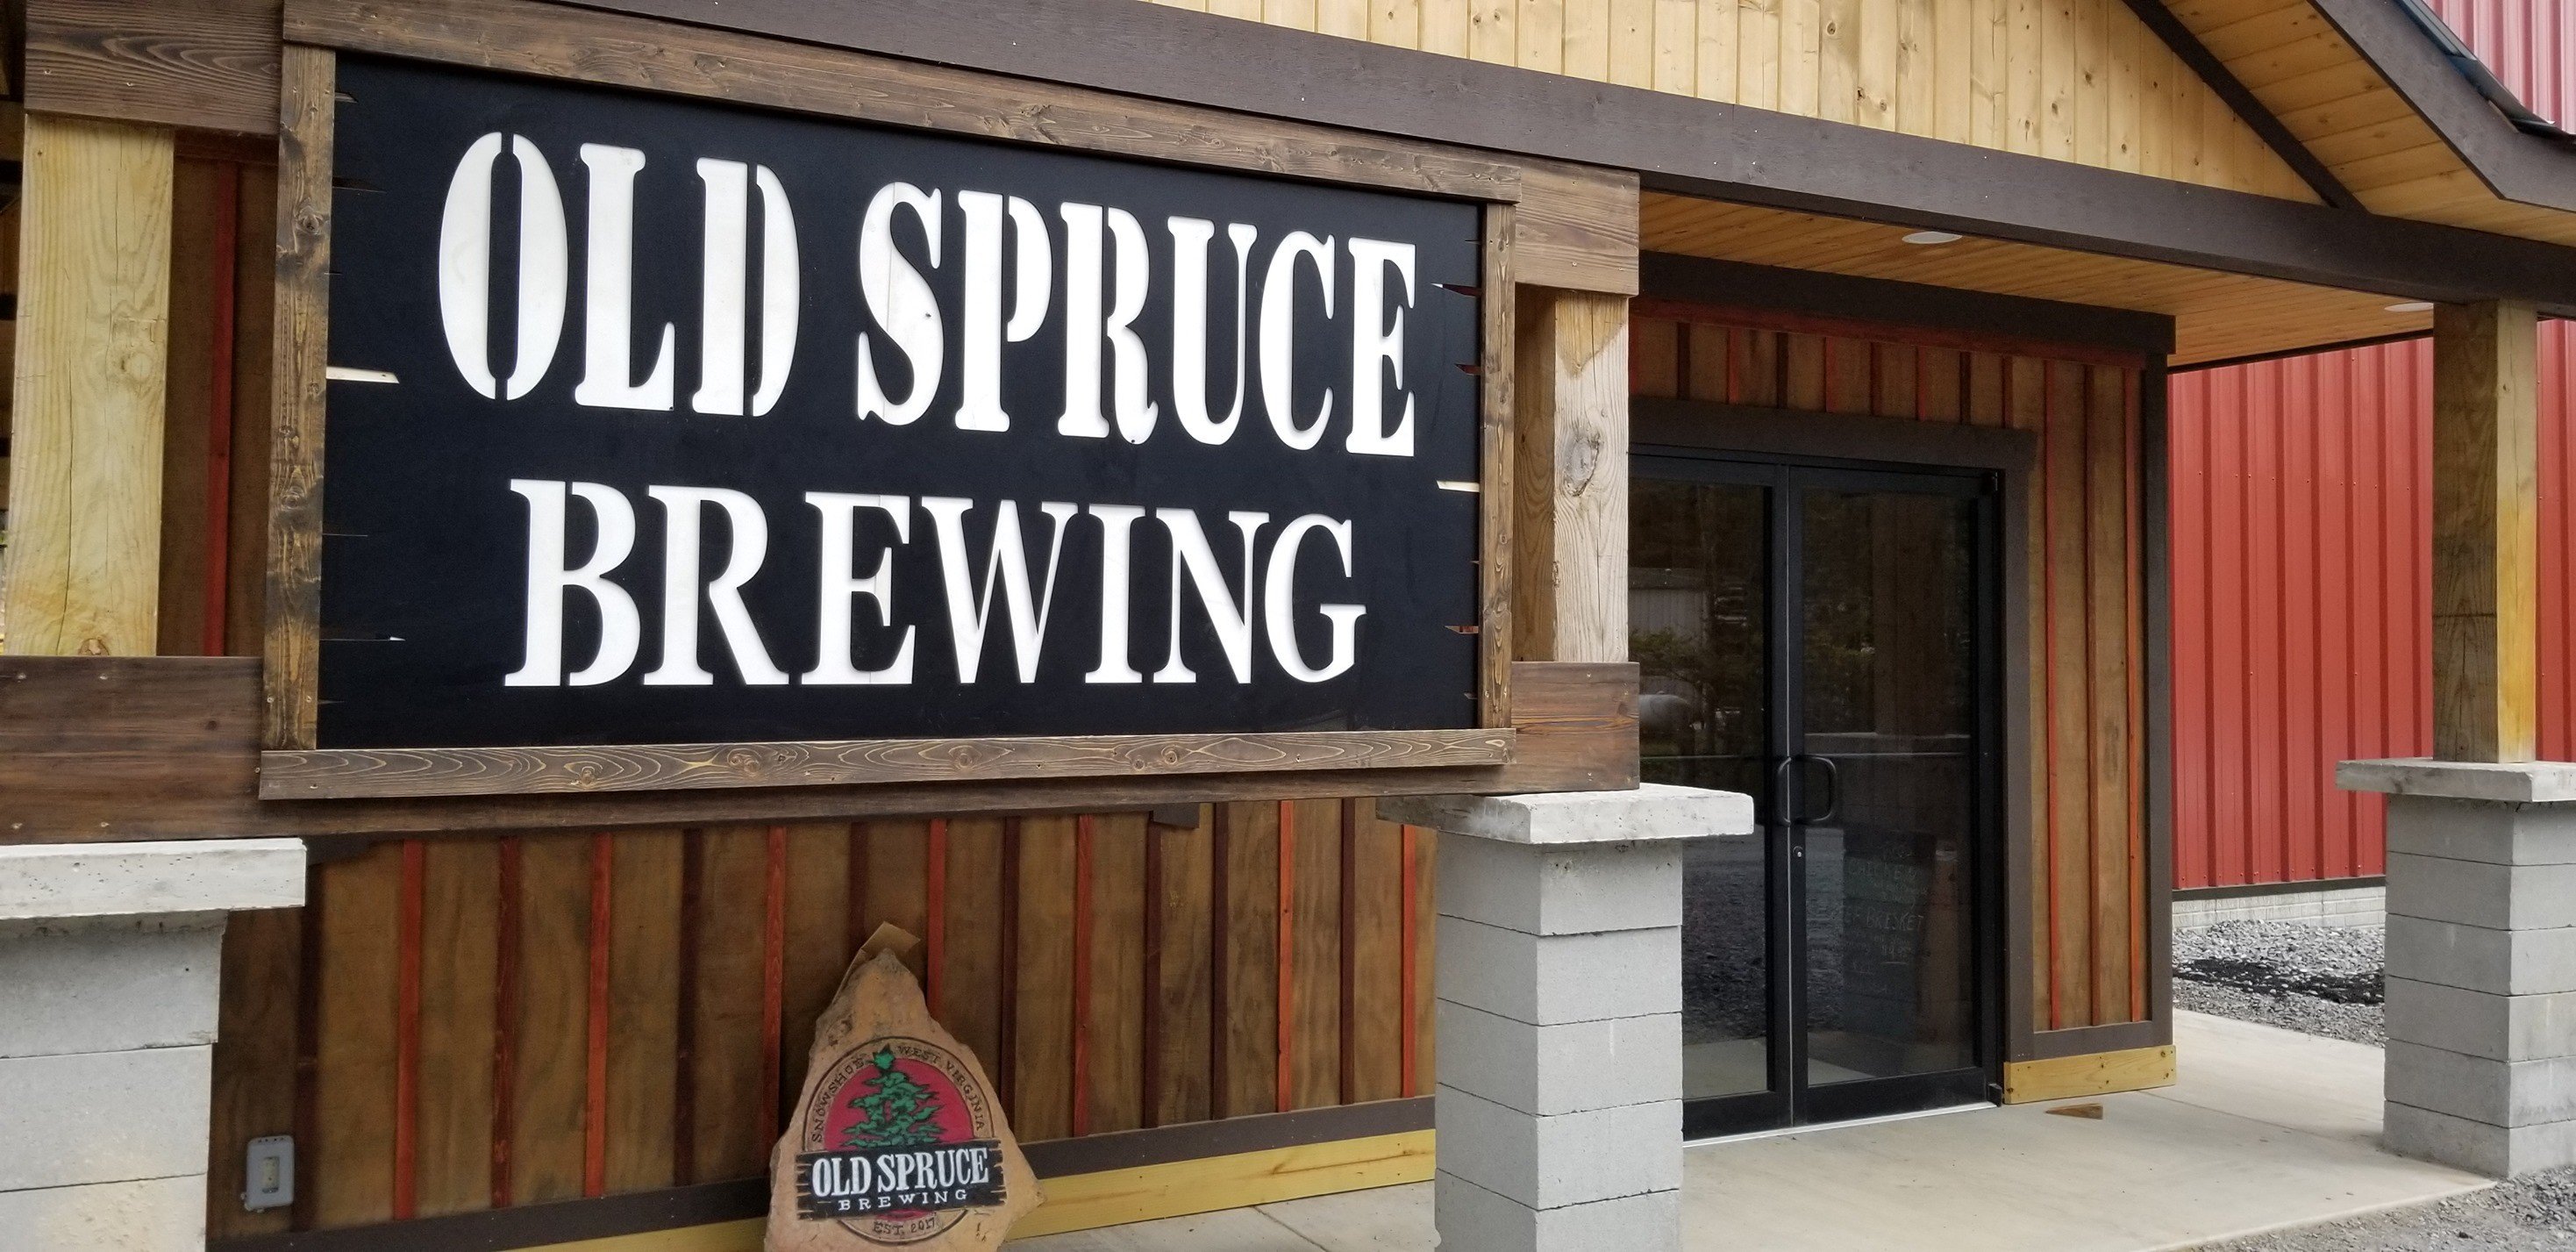 Old Spruce Brewing brewery from United States